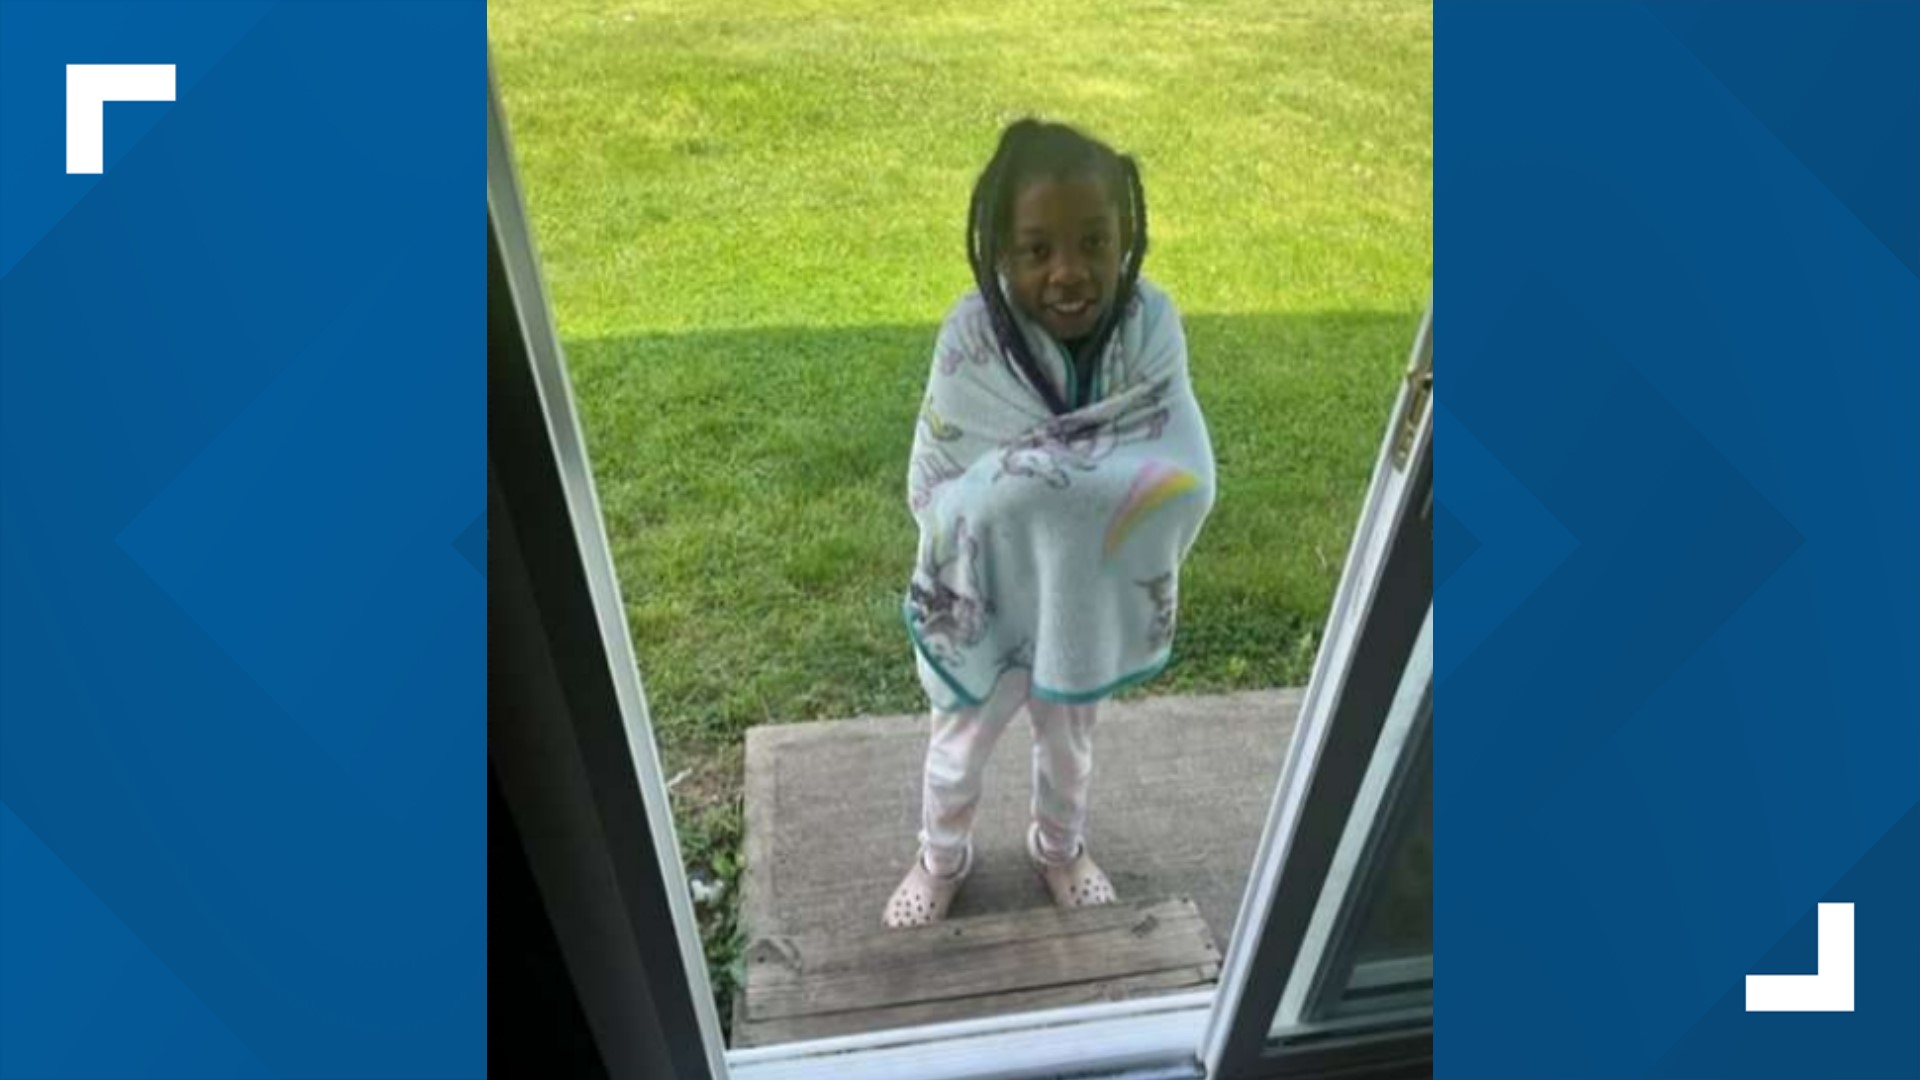 Authorities say the girl was safely reunited with her legal guardian at a Columbus restaurant.